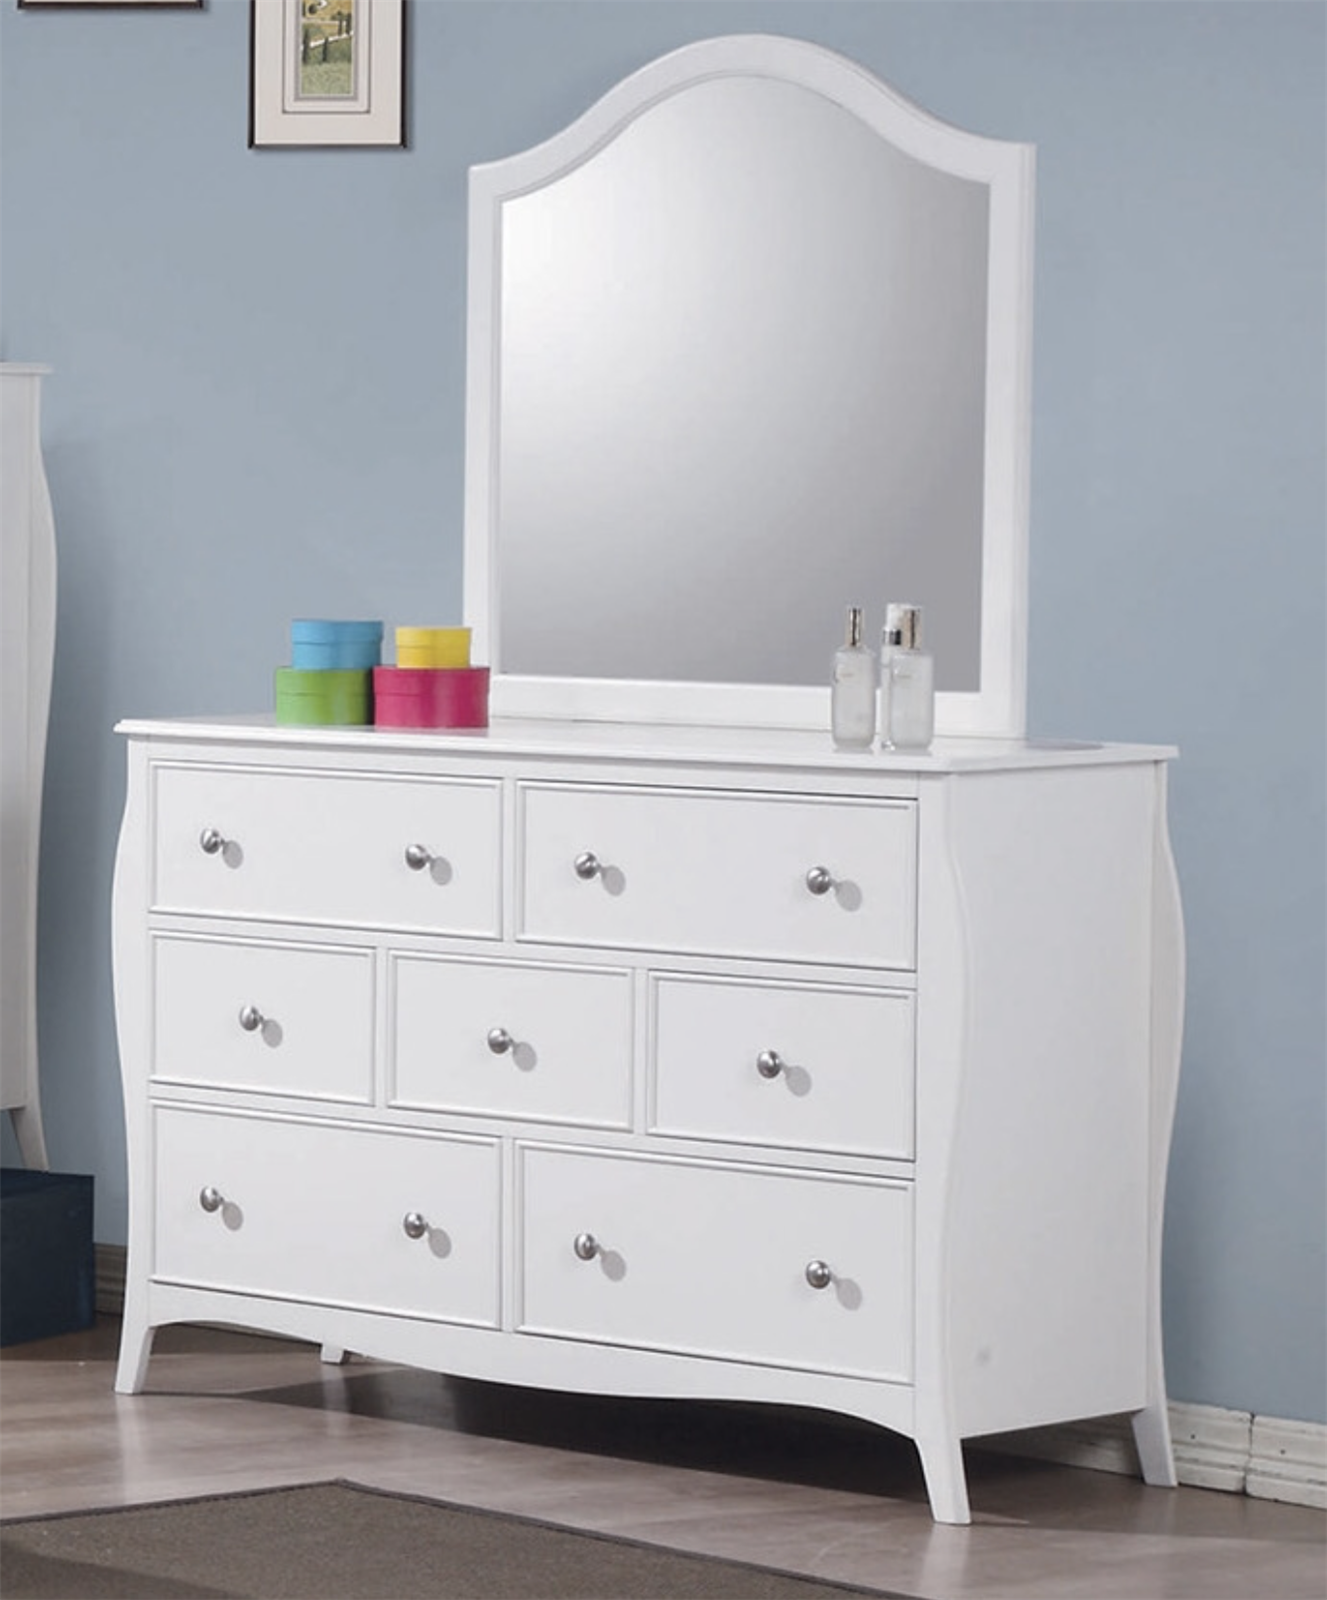 Molly Fairytale Style 7-Drawer Dresser in White